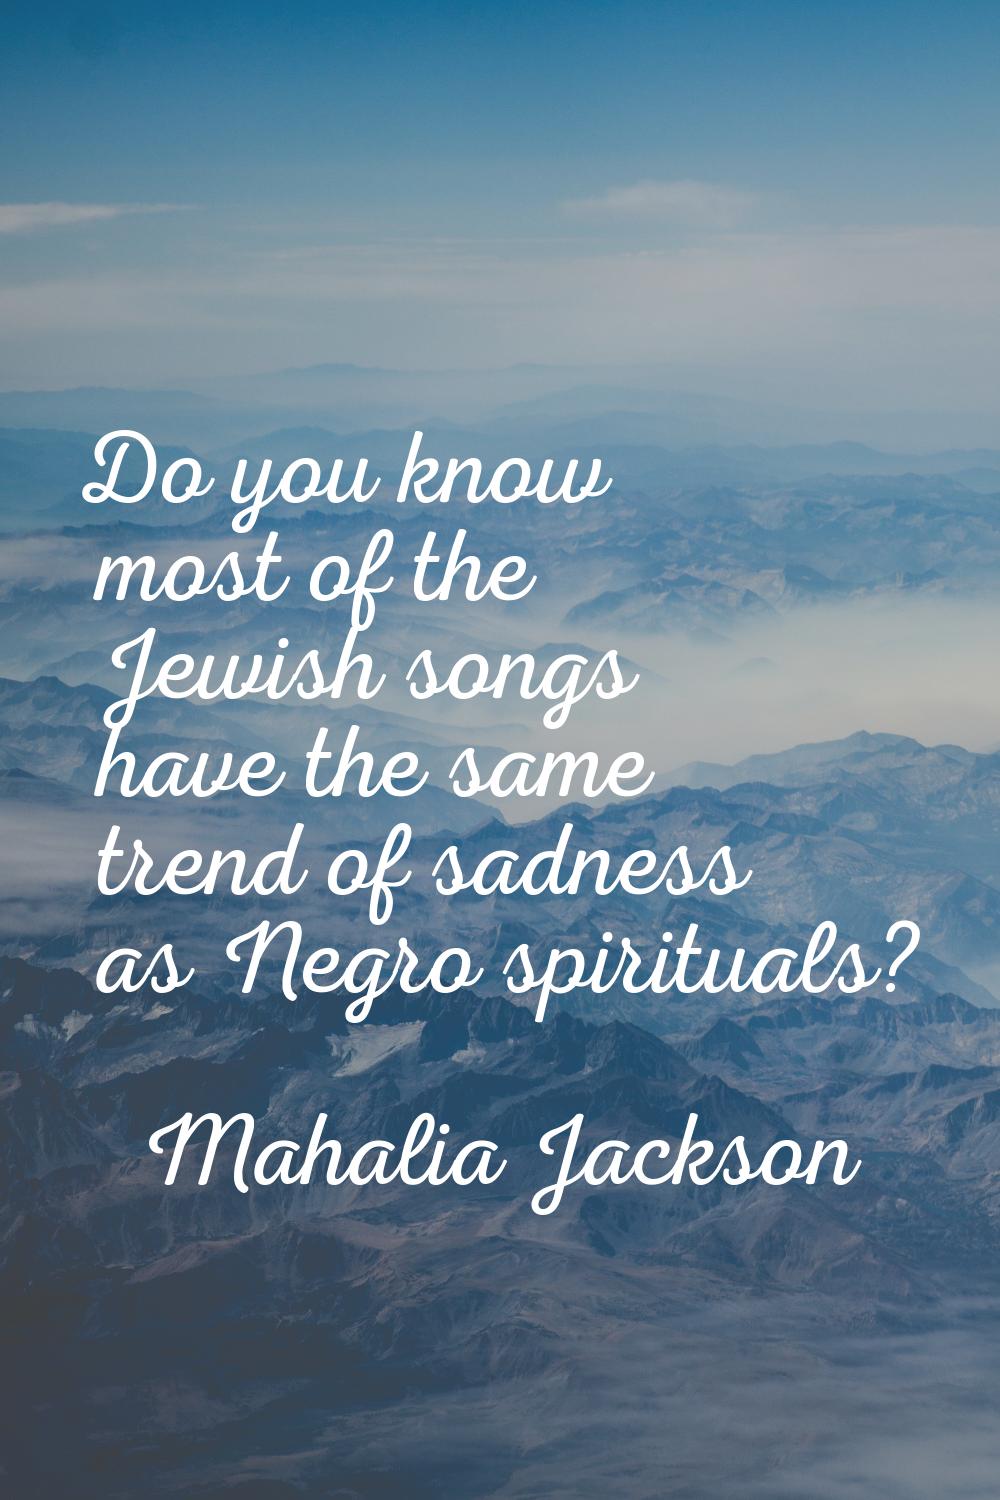 Do you know most of the Jewish songs have the same trend of sadness as Negro spirituals?